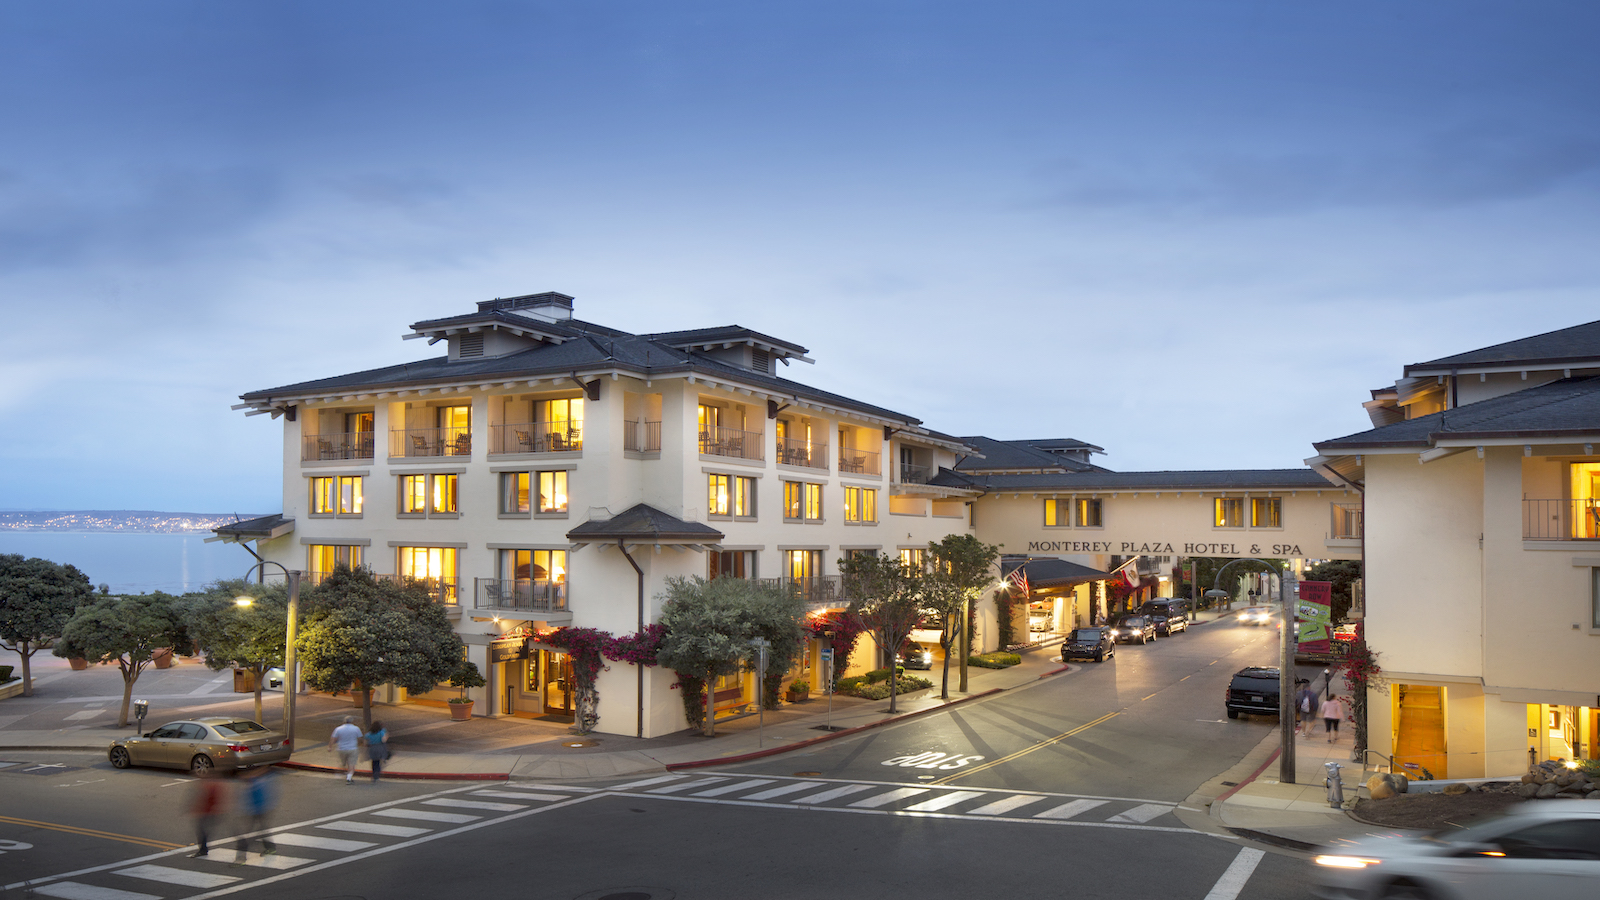 Exterior of the Monterey Plaza Hotel as seen from the streets in Monterey, California. Best Hotels on the Monterey Peninsula for Group Getaways